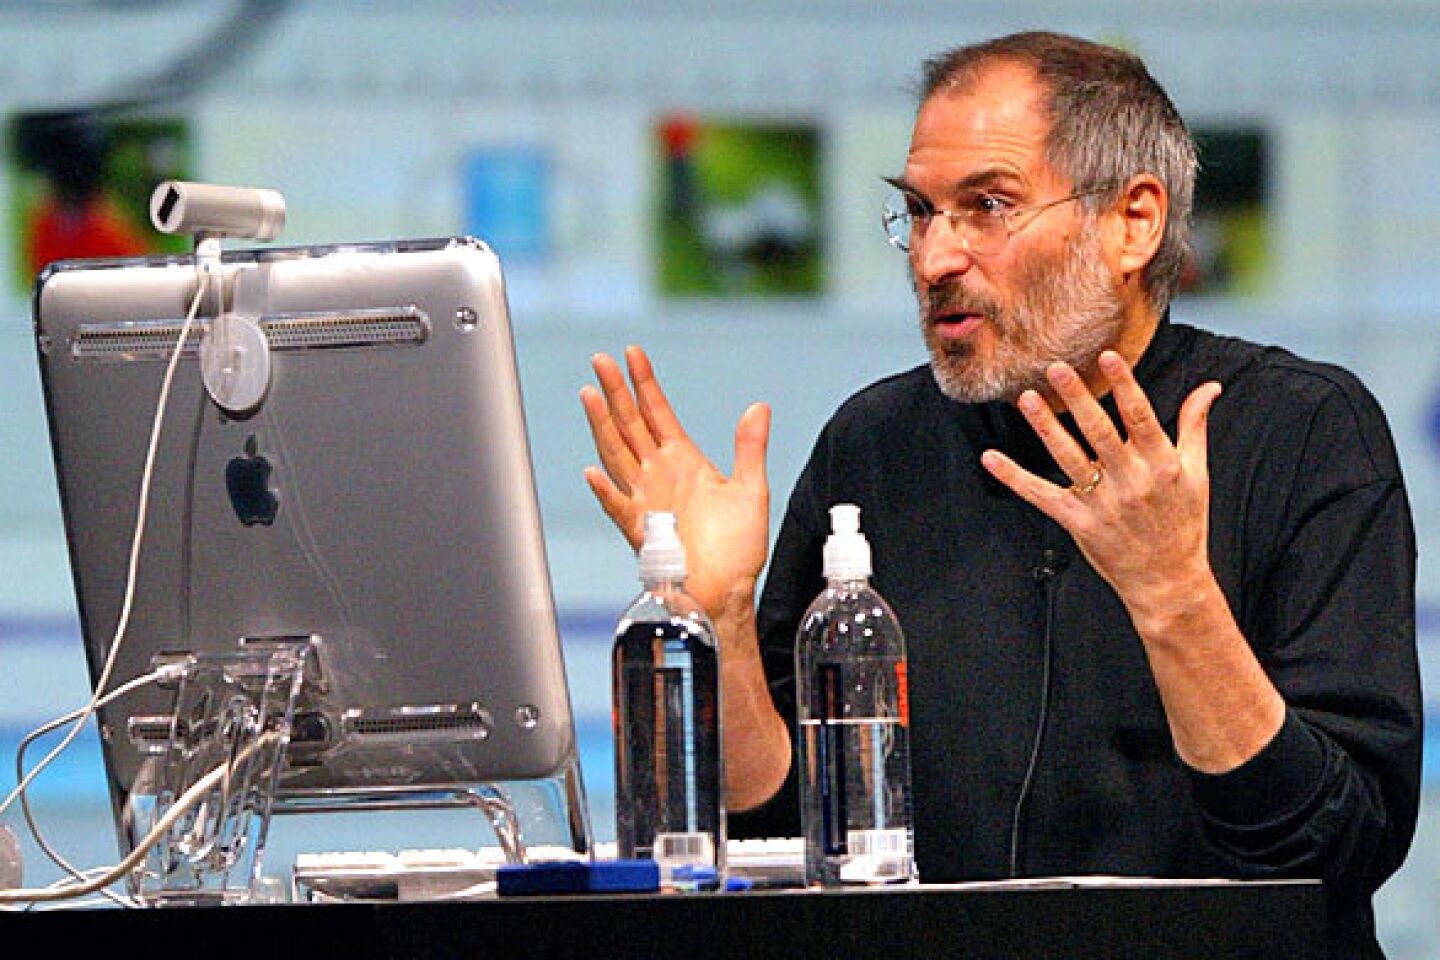 Jobs gestures as he delivers a keynote address at the 2004 MacWorld conference. Jobs announced several new products including the new iLife 4 software and the iPod Mini.